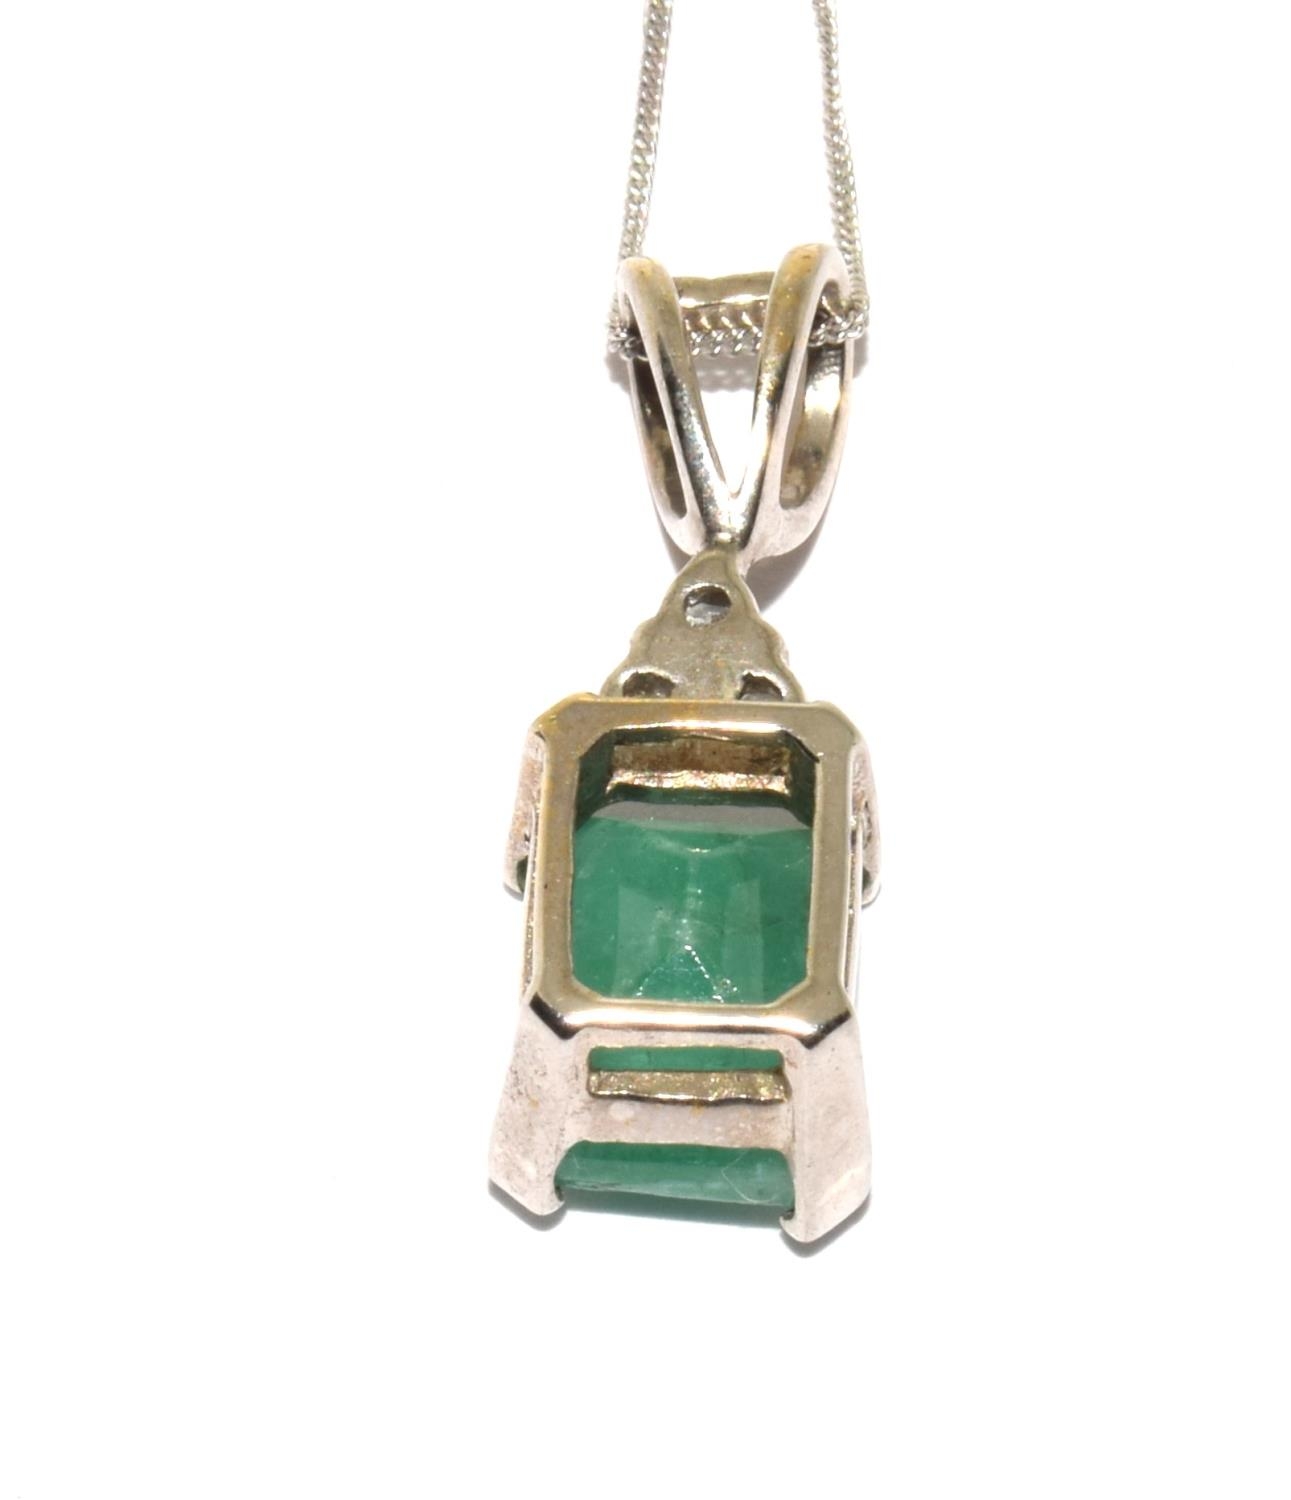 9ct white gold Diamond and Emerald pendant necklace chain 40cm - Image 5 of 6